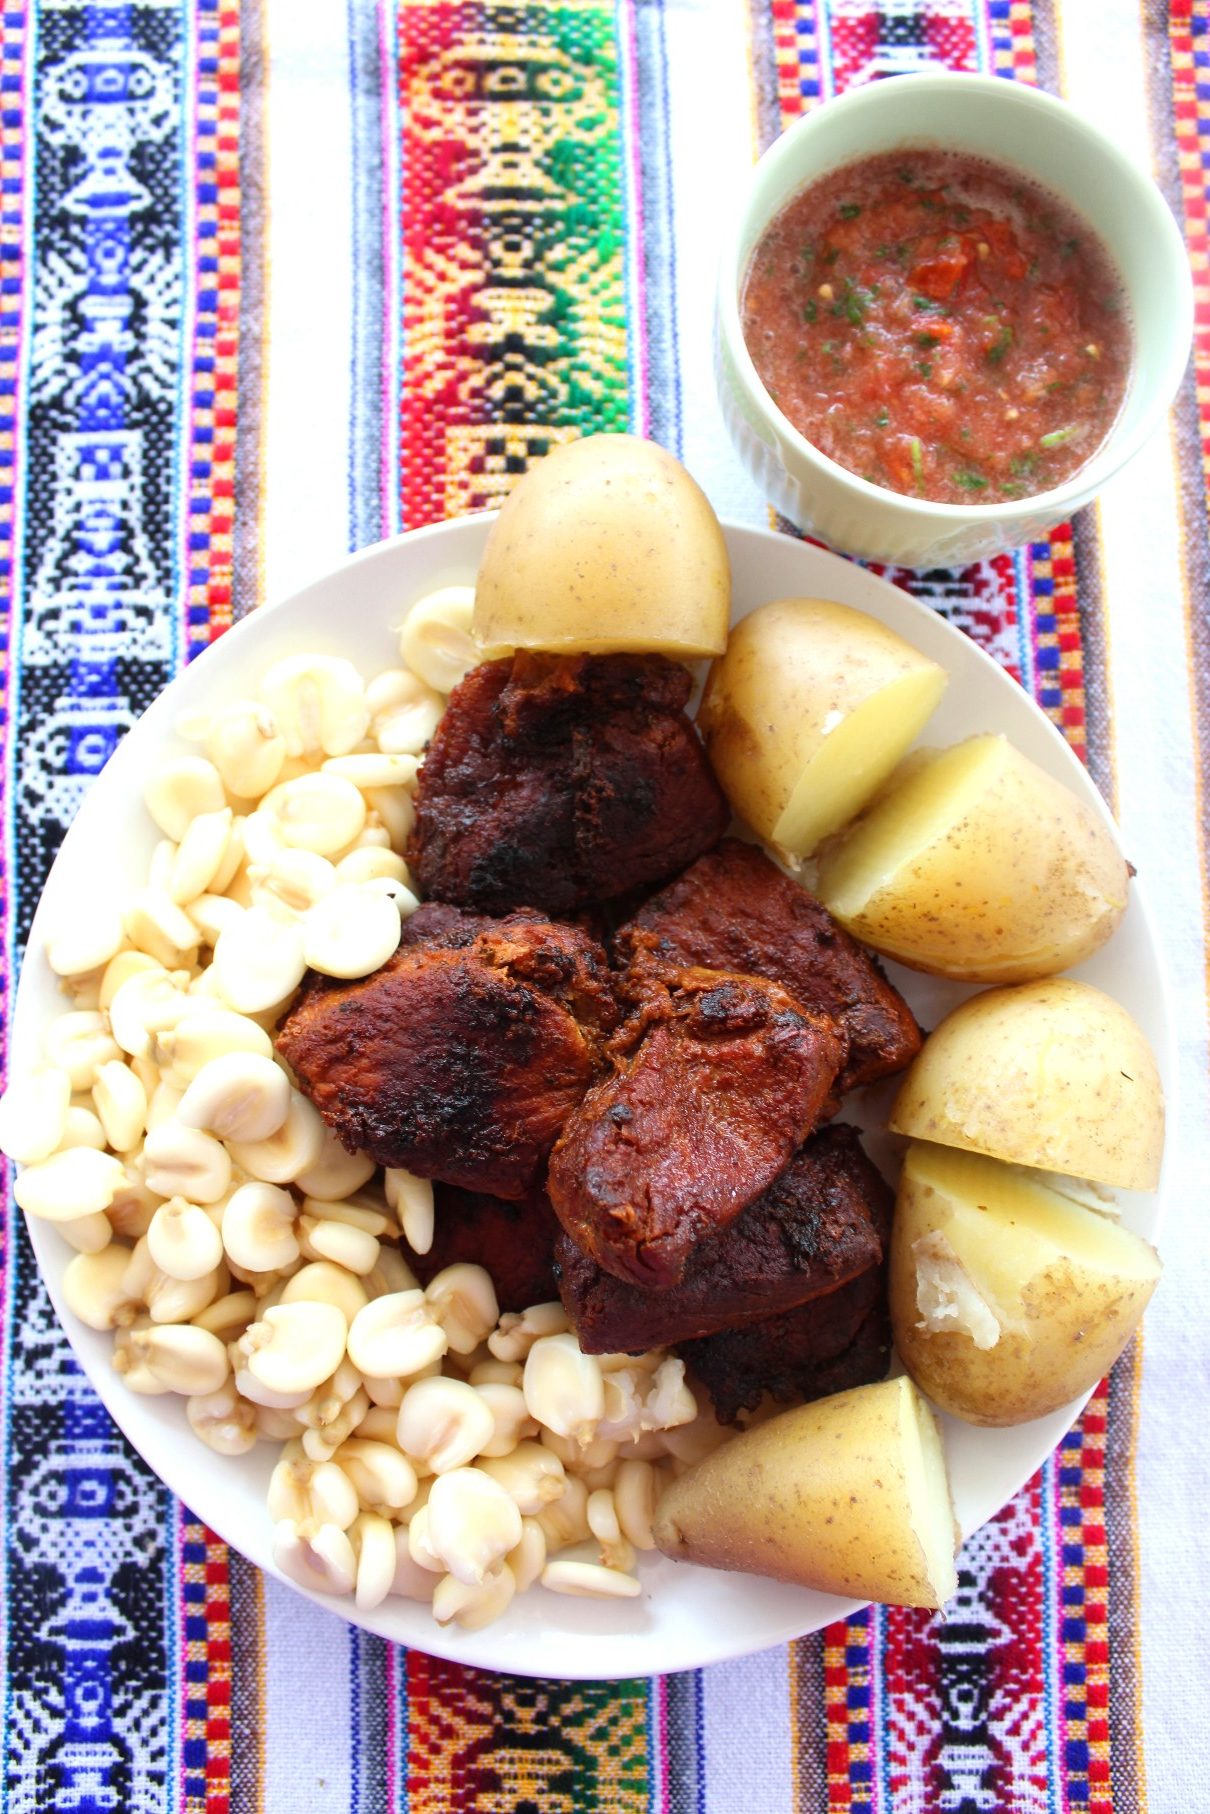 Pork chicharron served on a platter with mote (white large grain corn) and boiled potatoes. Next to the platter, there's a serving of a llajua (a Bolivian tomato salsa).